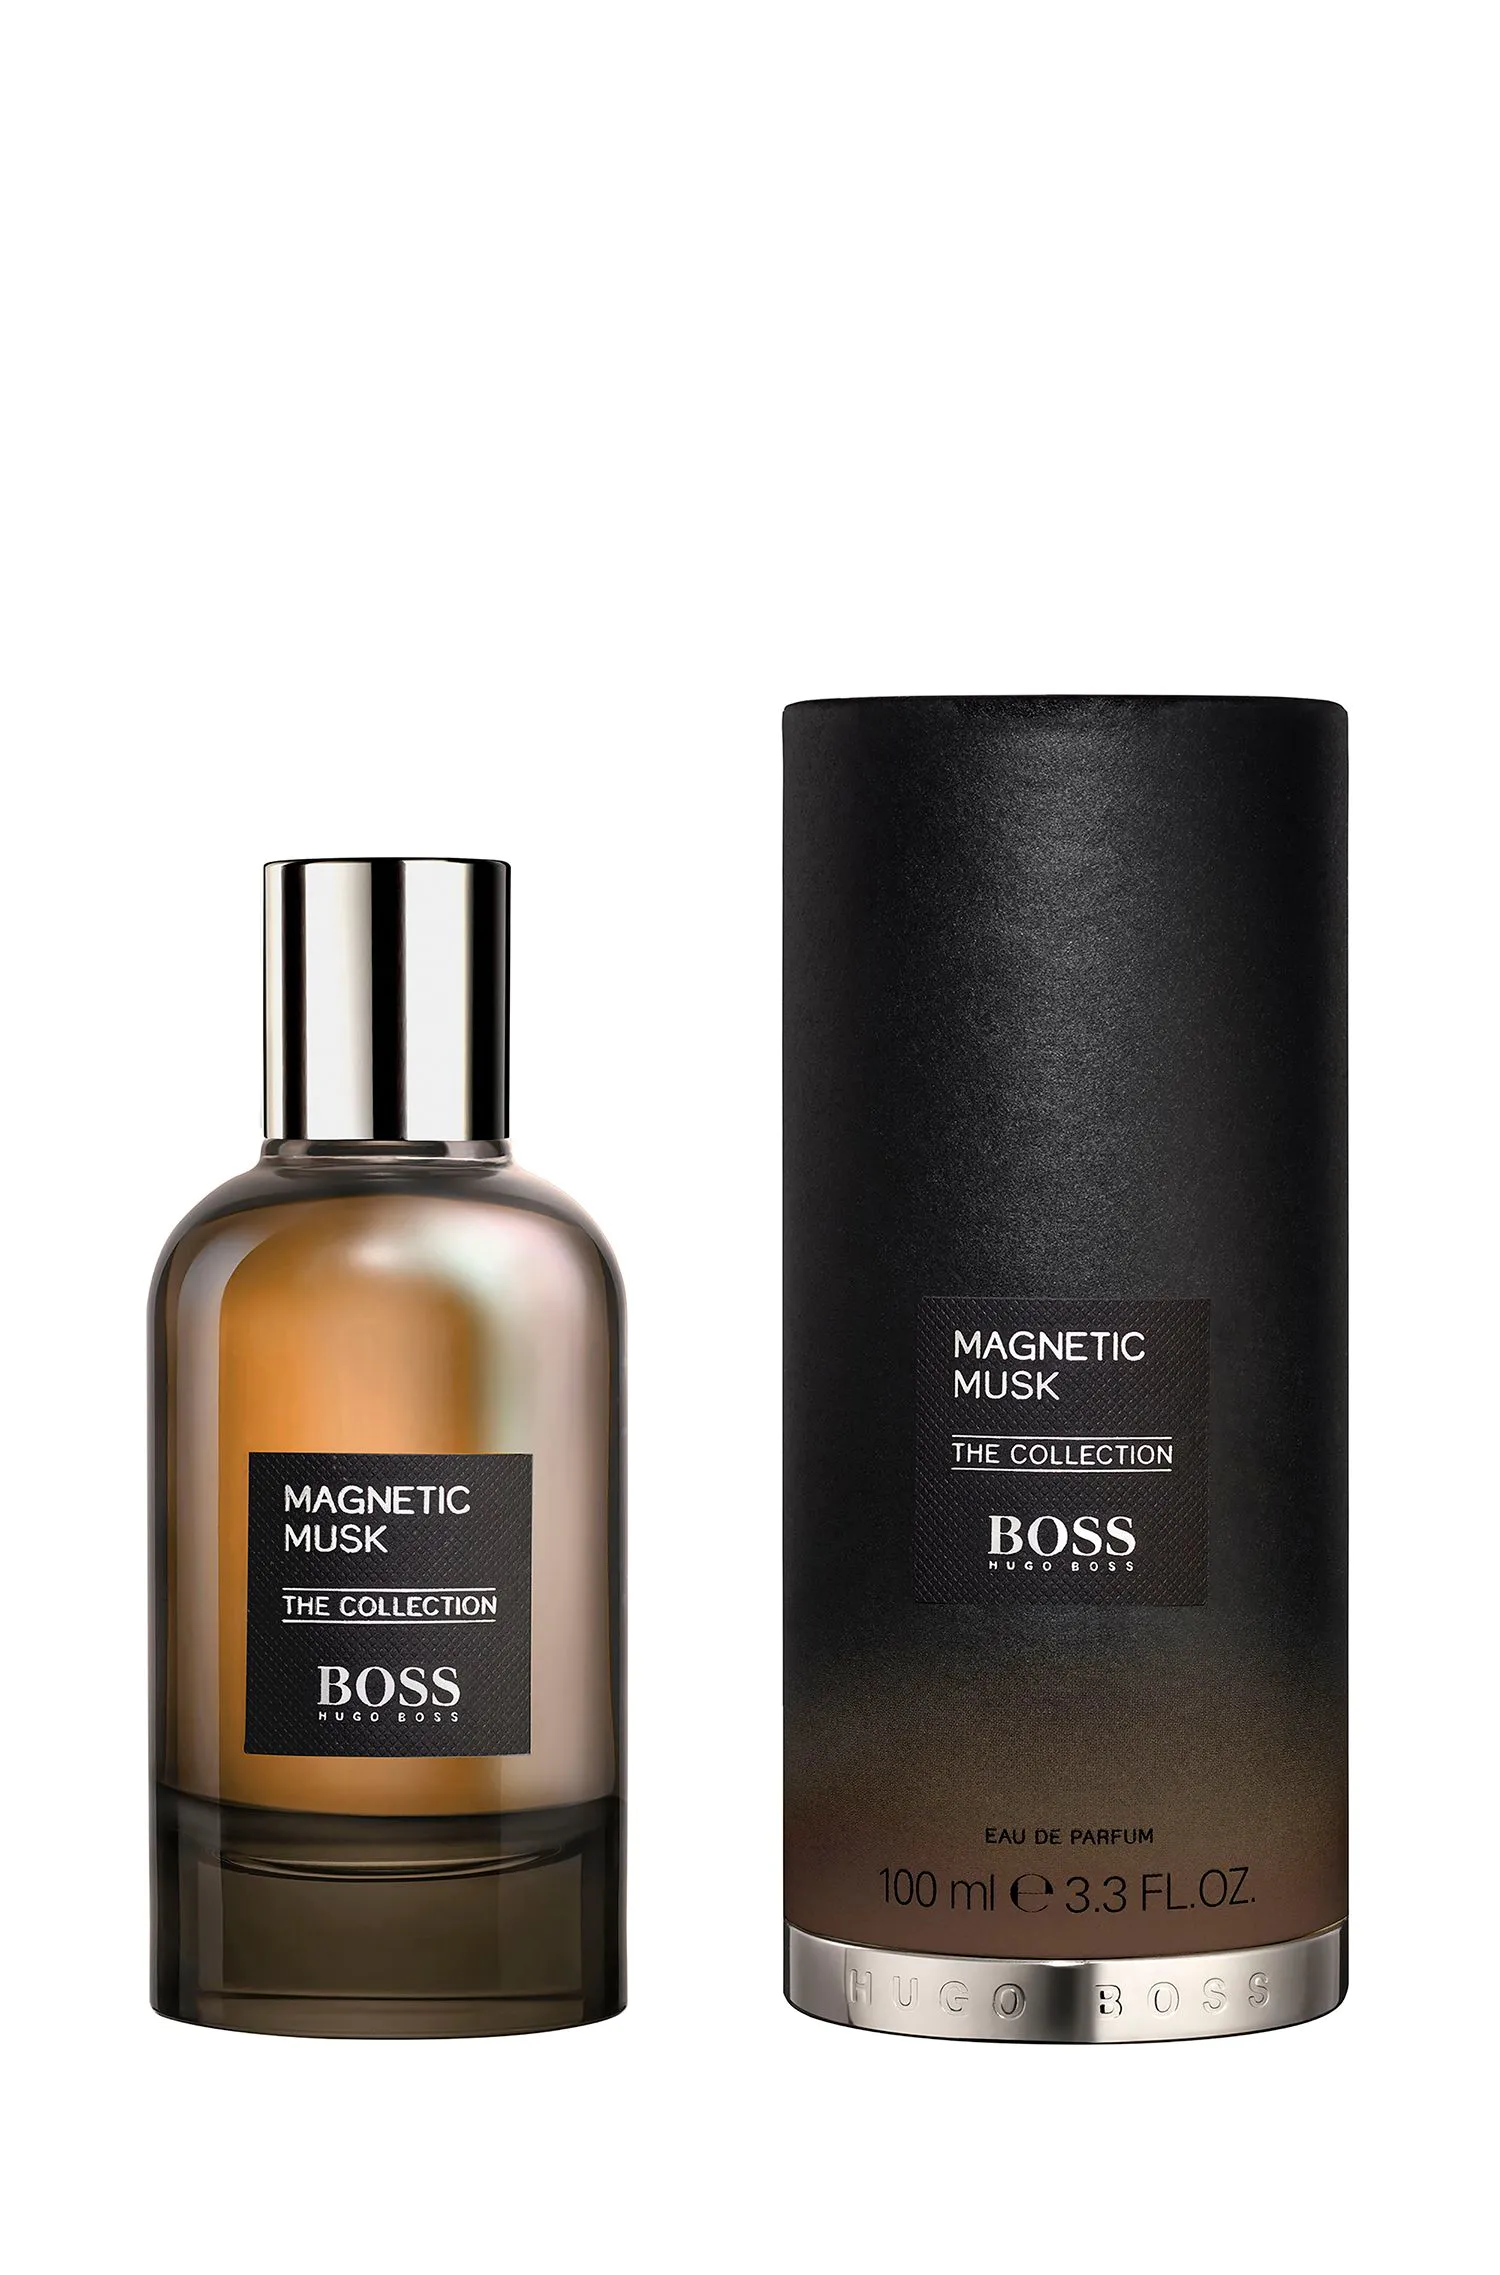 BOSS The Collection Magnetic Musk香水100毫升